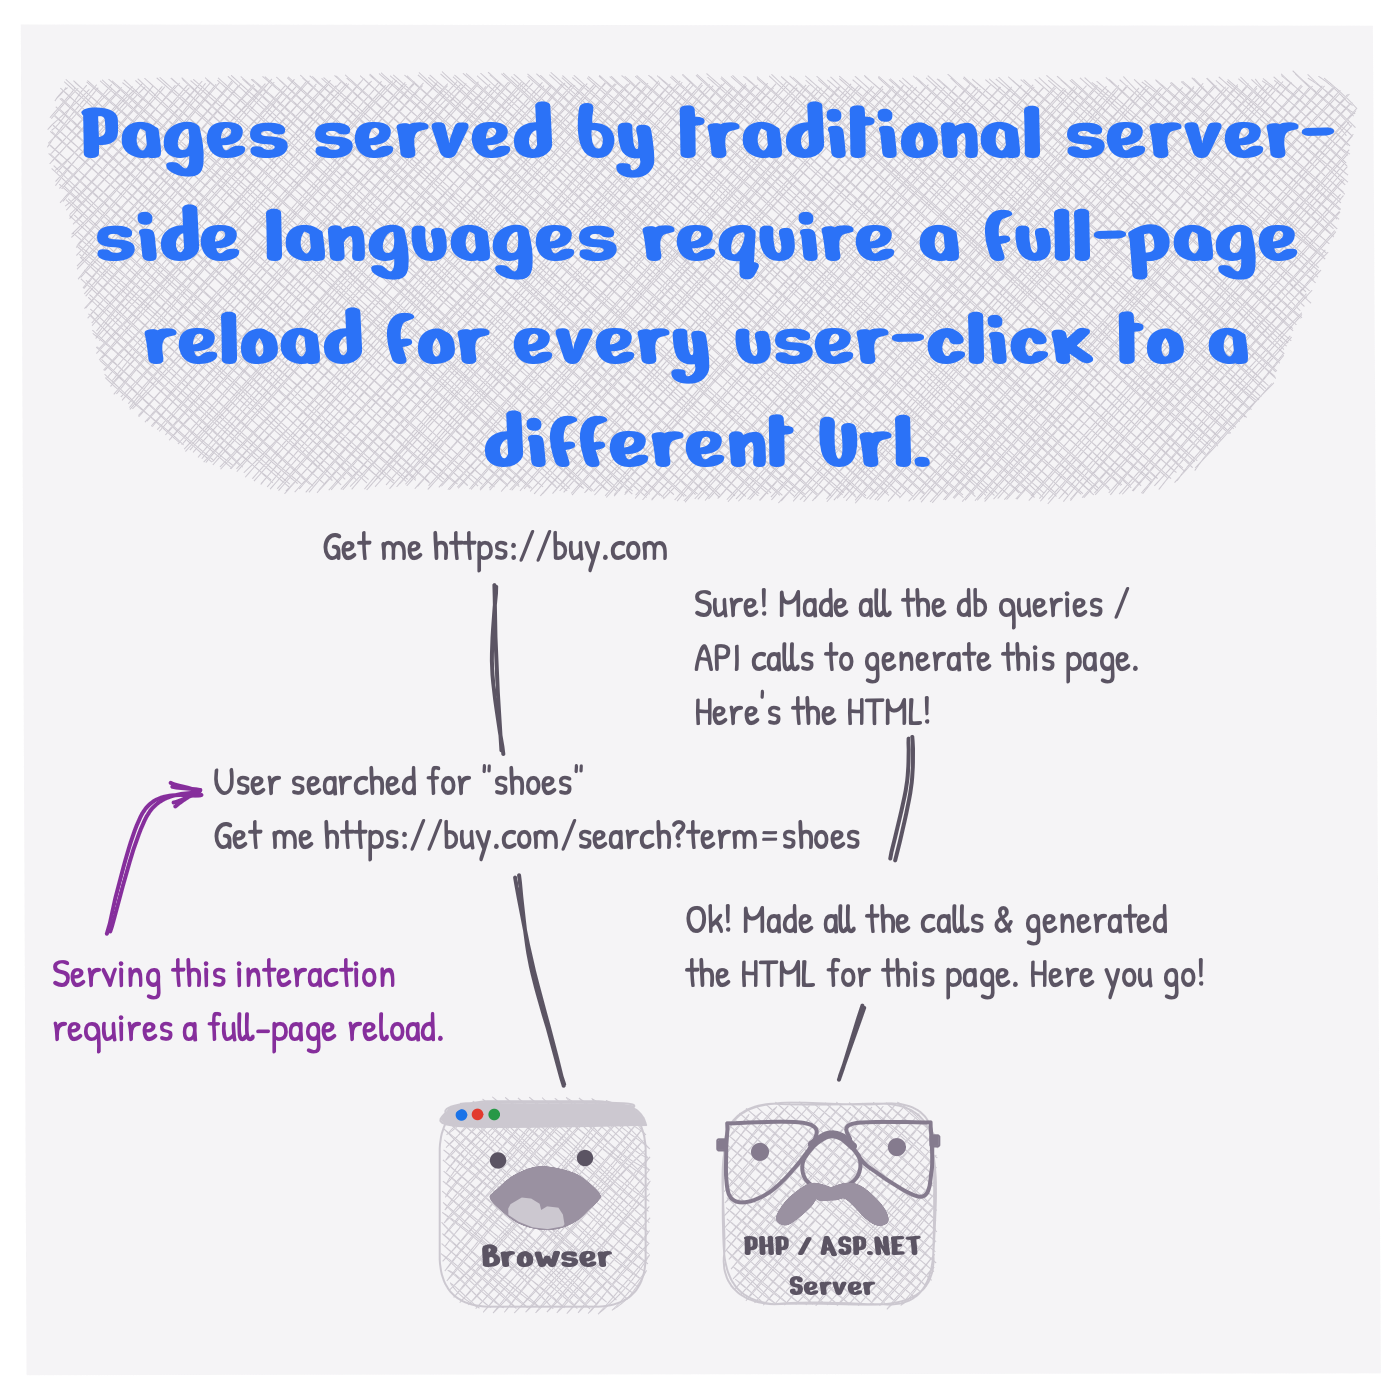 Pages served by traditional server-side languages require a full-page reload for every user-click to a different url.